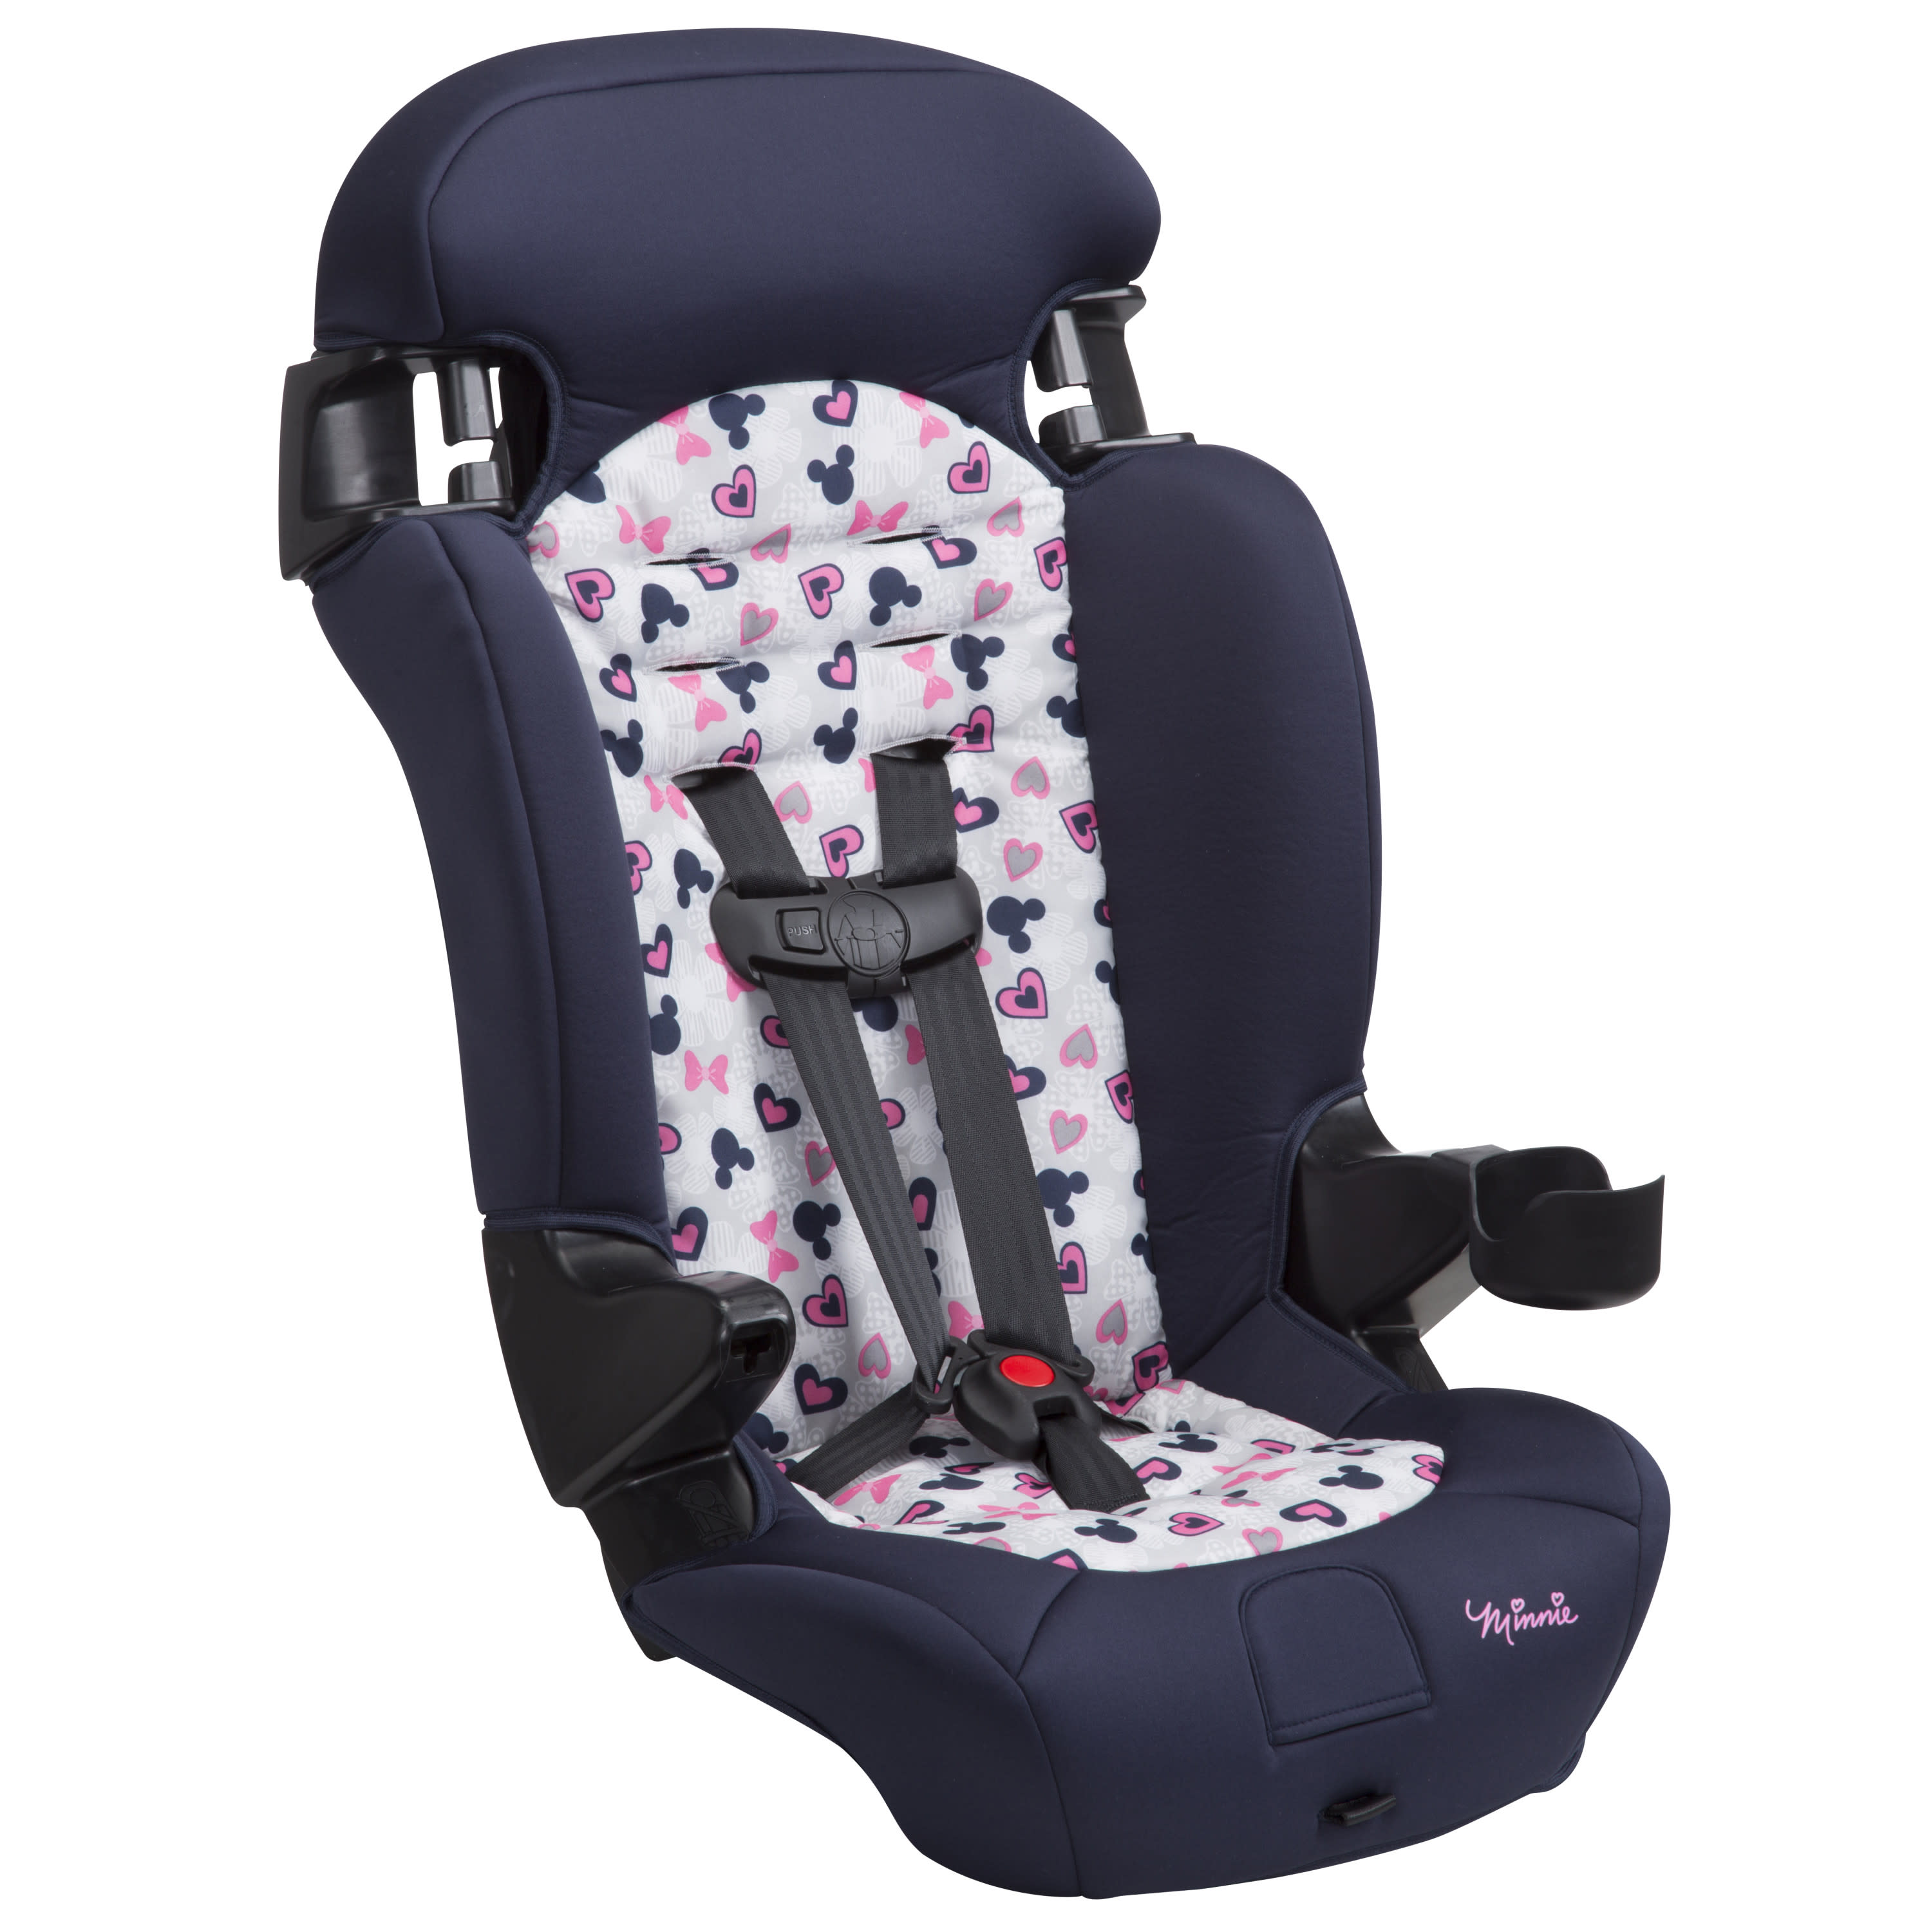 Disney Baby Finale 2-in-1 Booster Car Seat, Minnie's Favorite Things - image 5 of 14